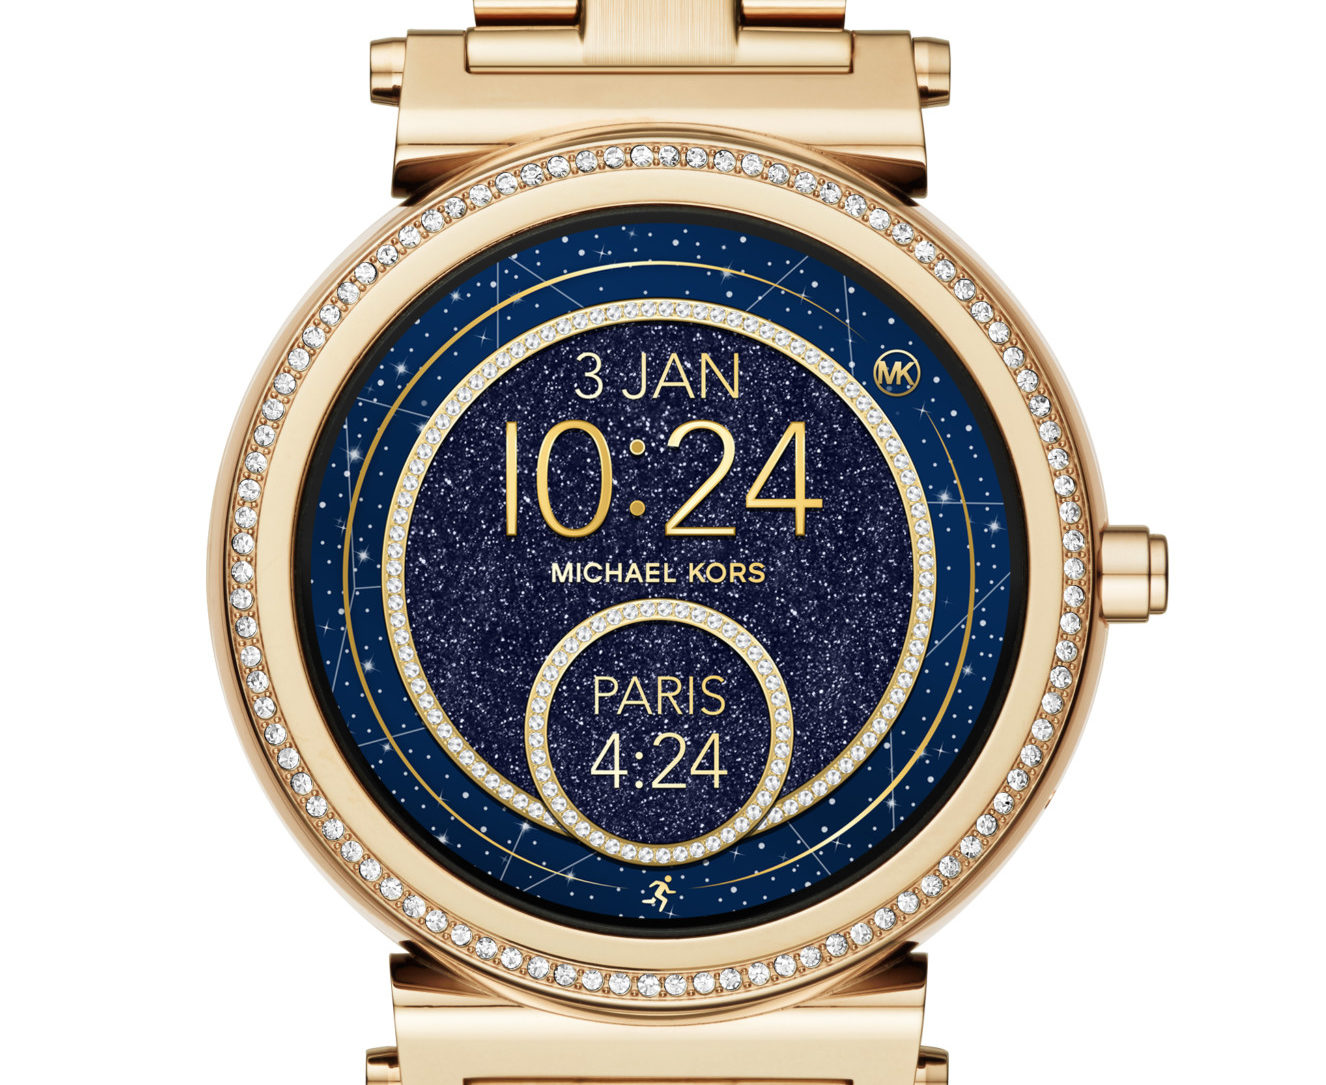 Michael Kors brings luxury to smart watches Will they sell  CSMonitorcom